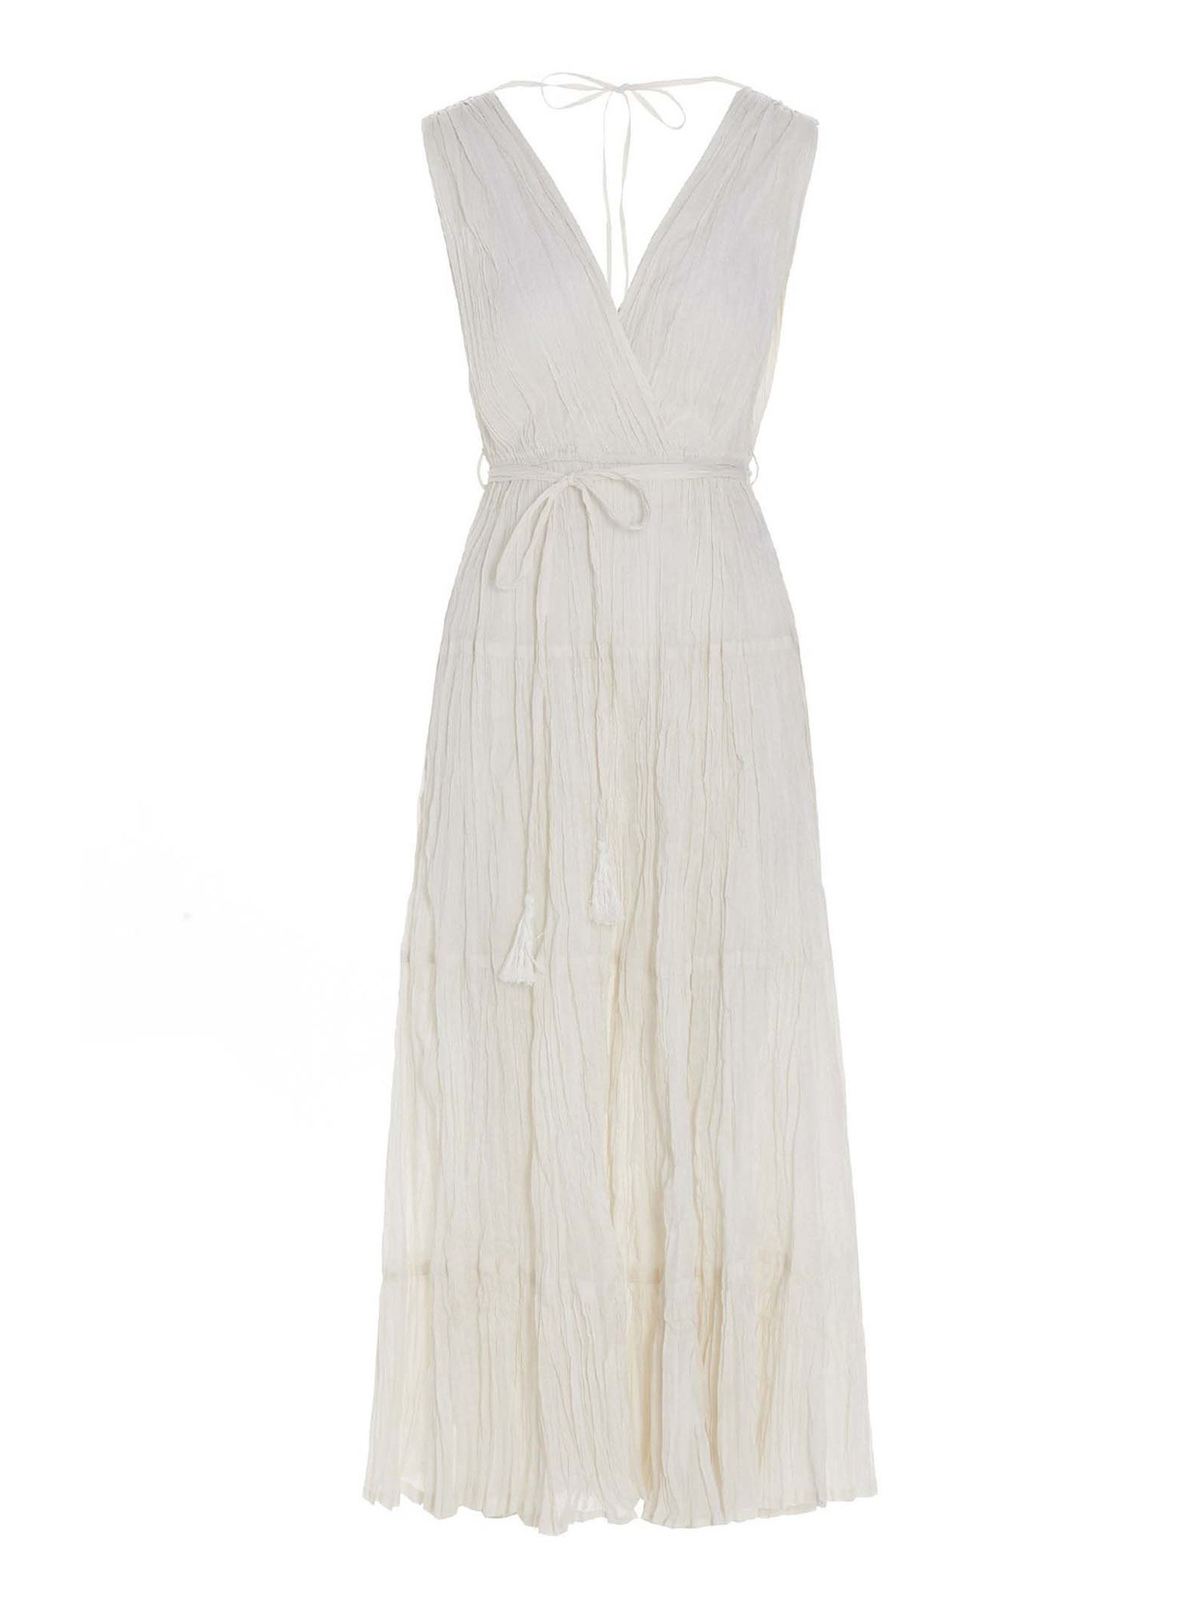 P.A.R.O.S.H WRINKLED EFFECT DRESS IN WHITE